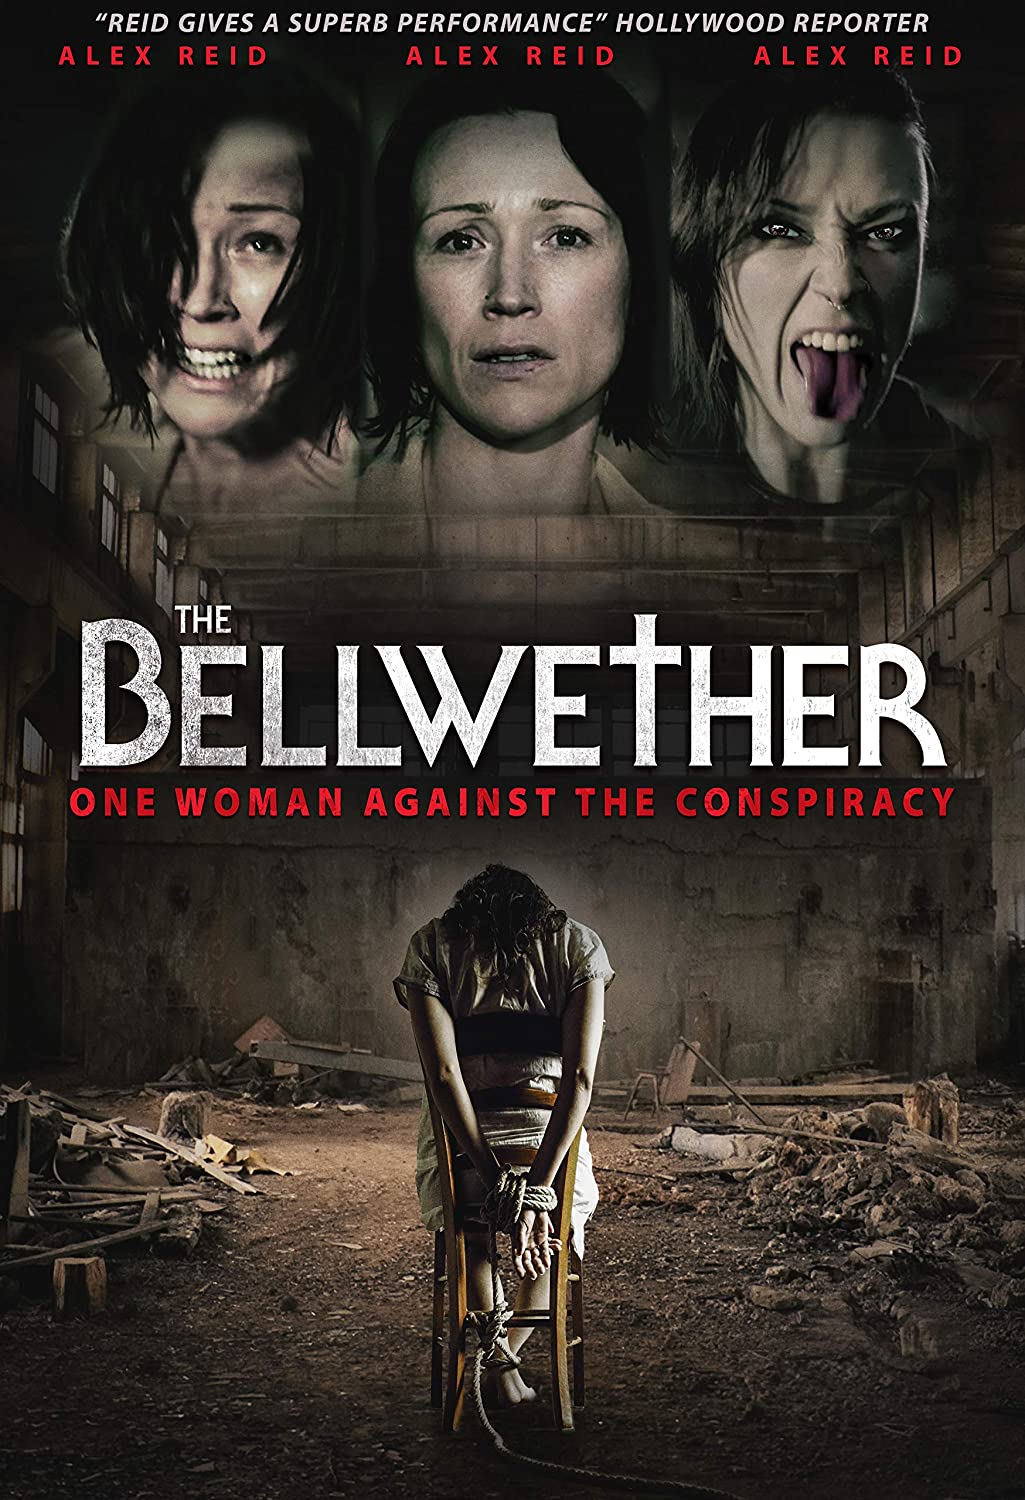 The Bellwether Poster for Amazon